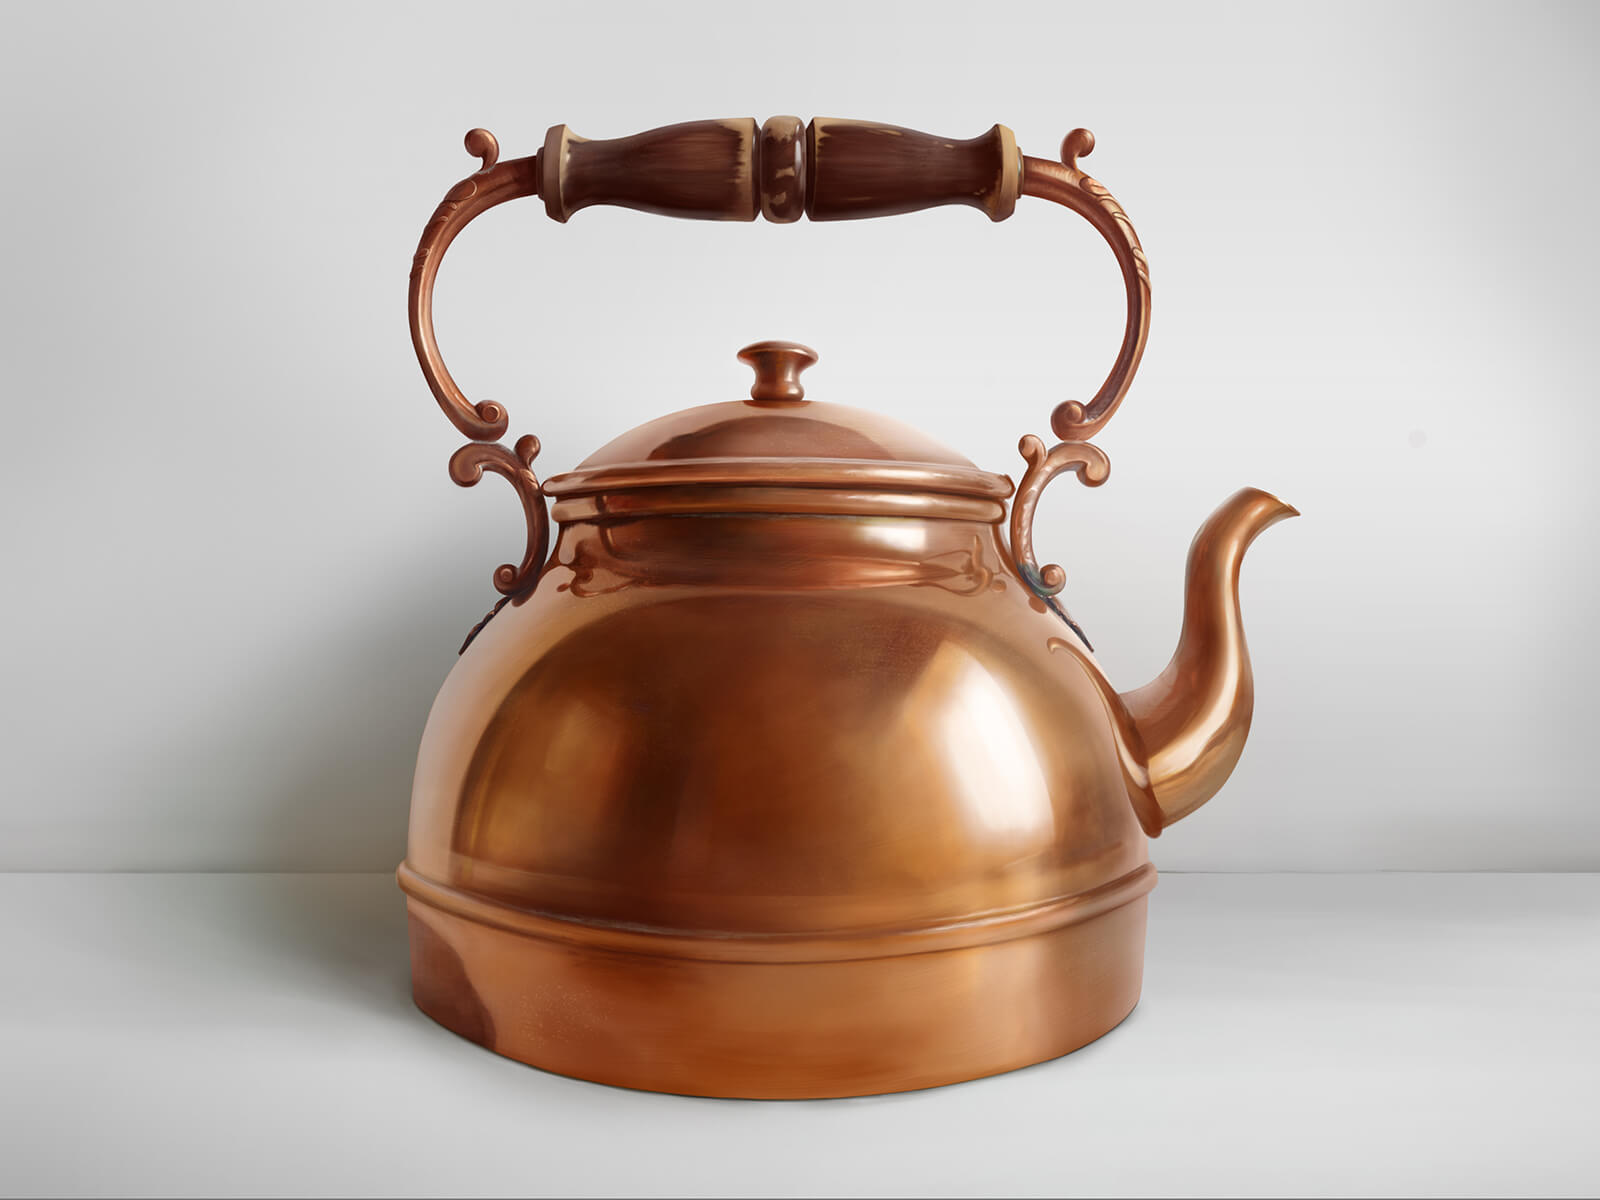 Still life painting of a copper kettle against a white background with an ornate wooden handle above.